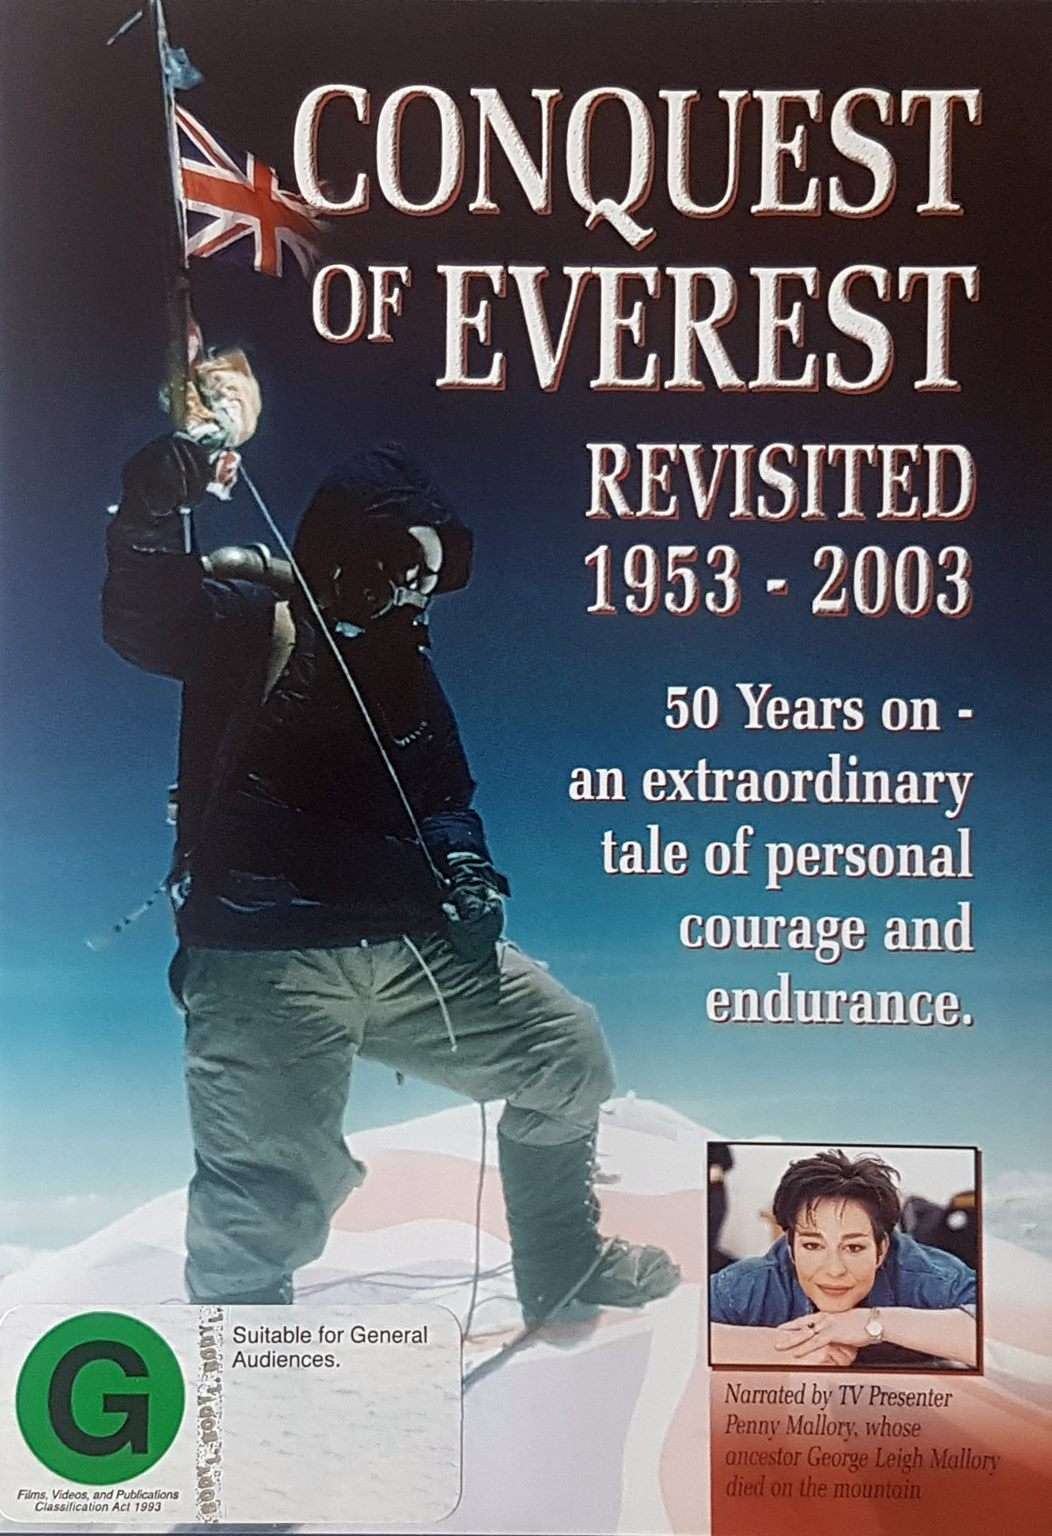 Conquest of Everest Revisited 1953 - 2003